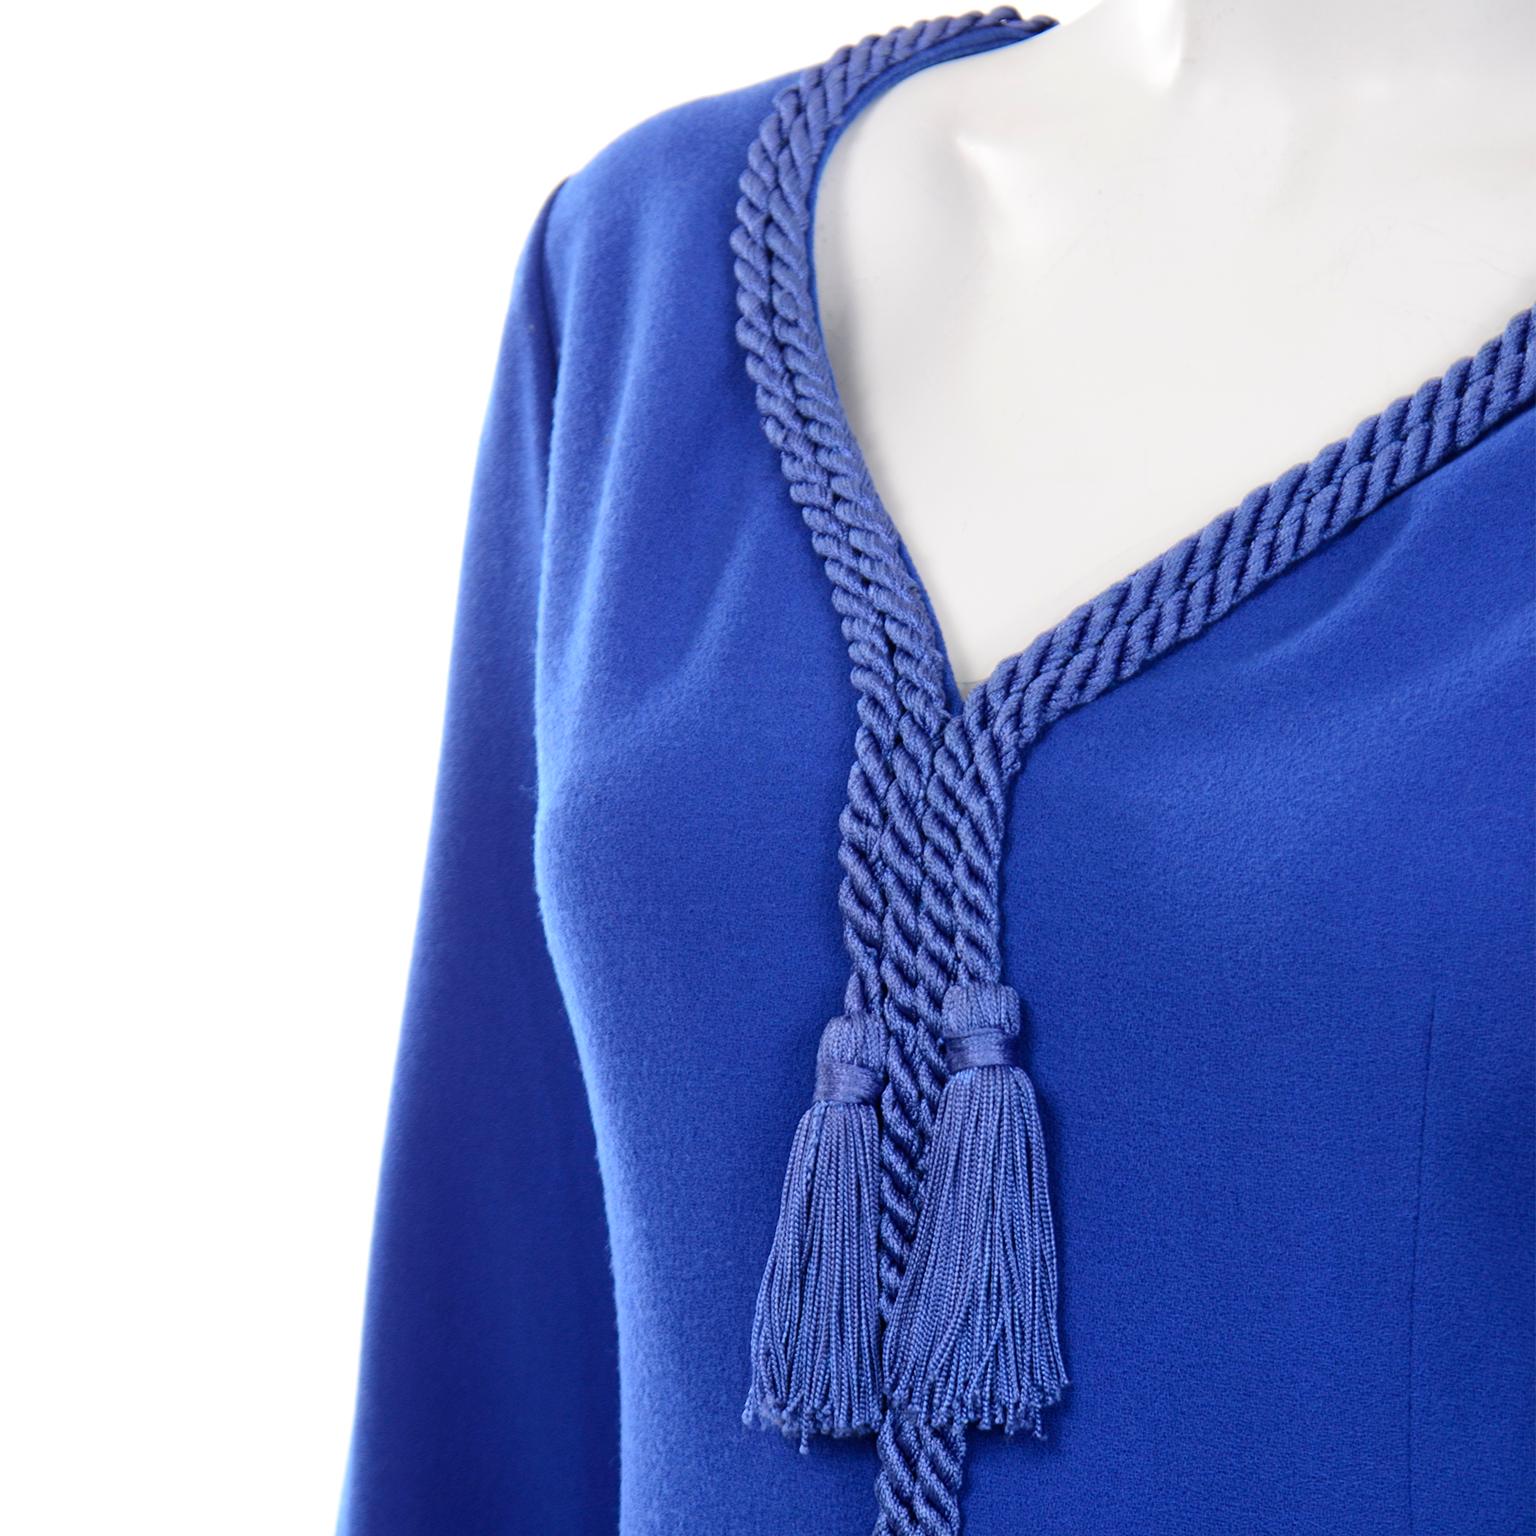 Valentino Blue Vintage Wool Crepe Dress With Rope and Tassel Details For Sale 3